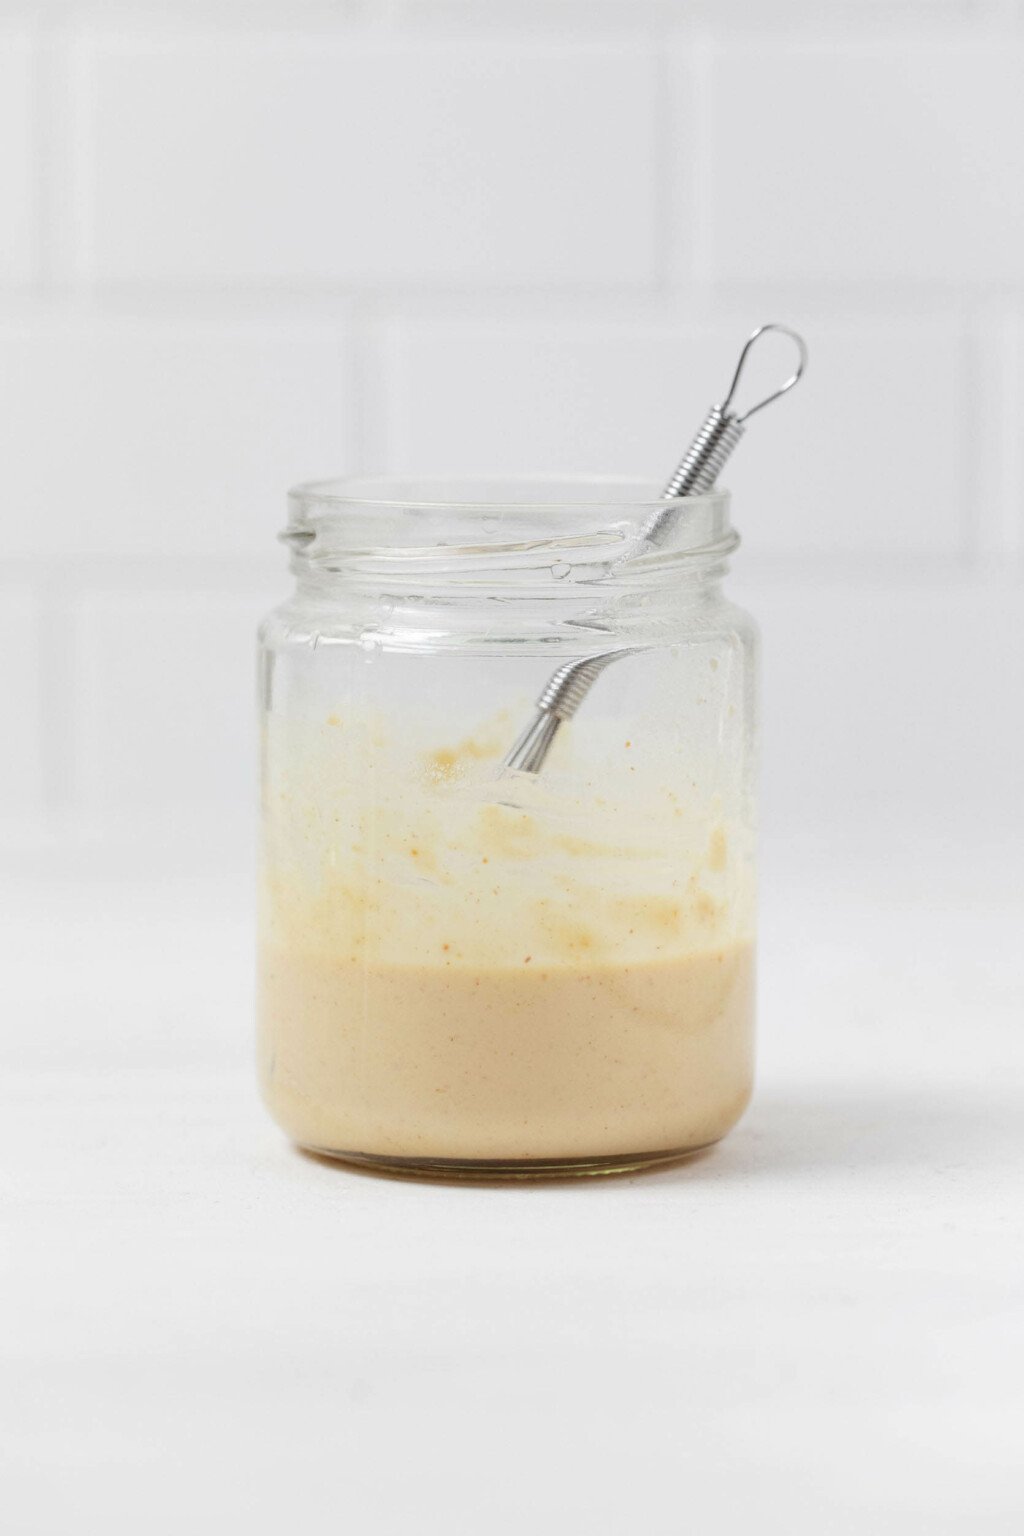 A jar of lemon tahini dressing and a small whisk are resting on a white surface.